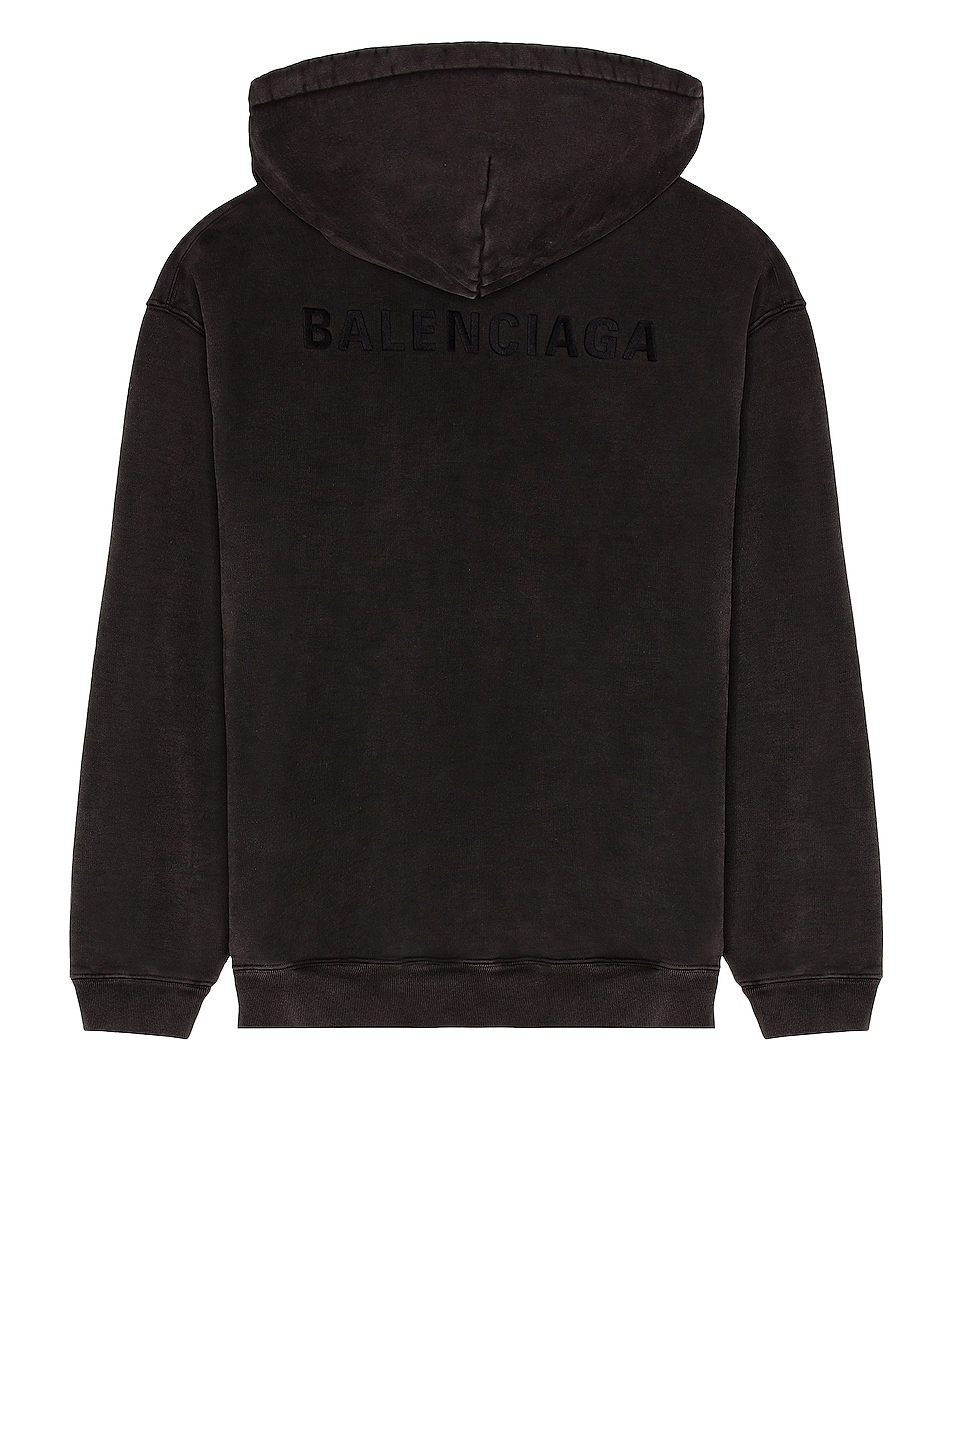 Image 1 of Balenciaga Embroidered Medium Fit Hoodie in Black Fade Out